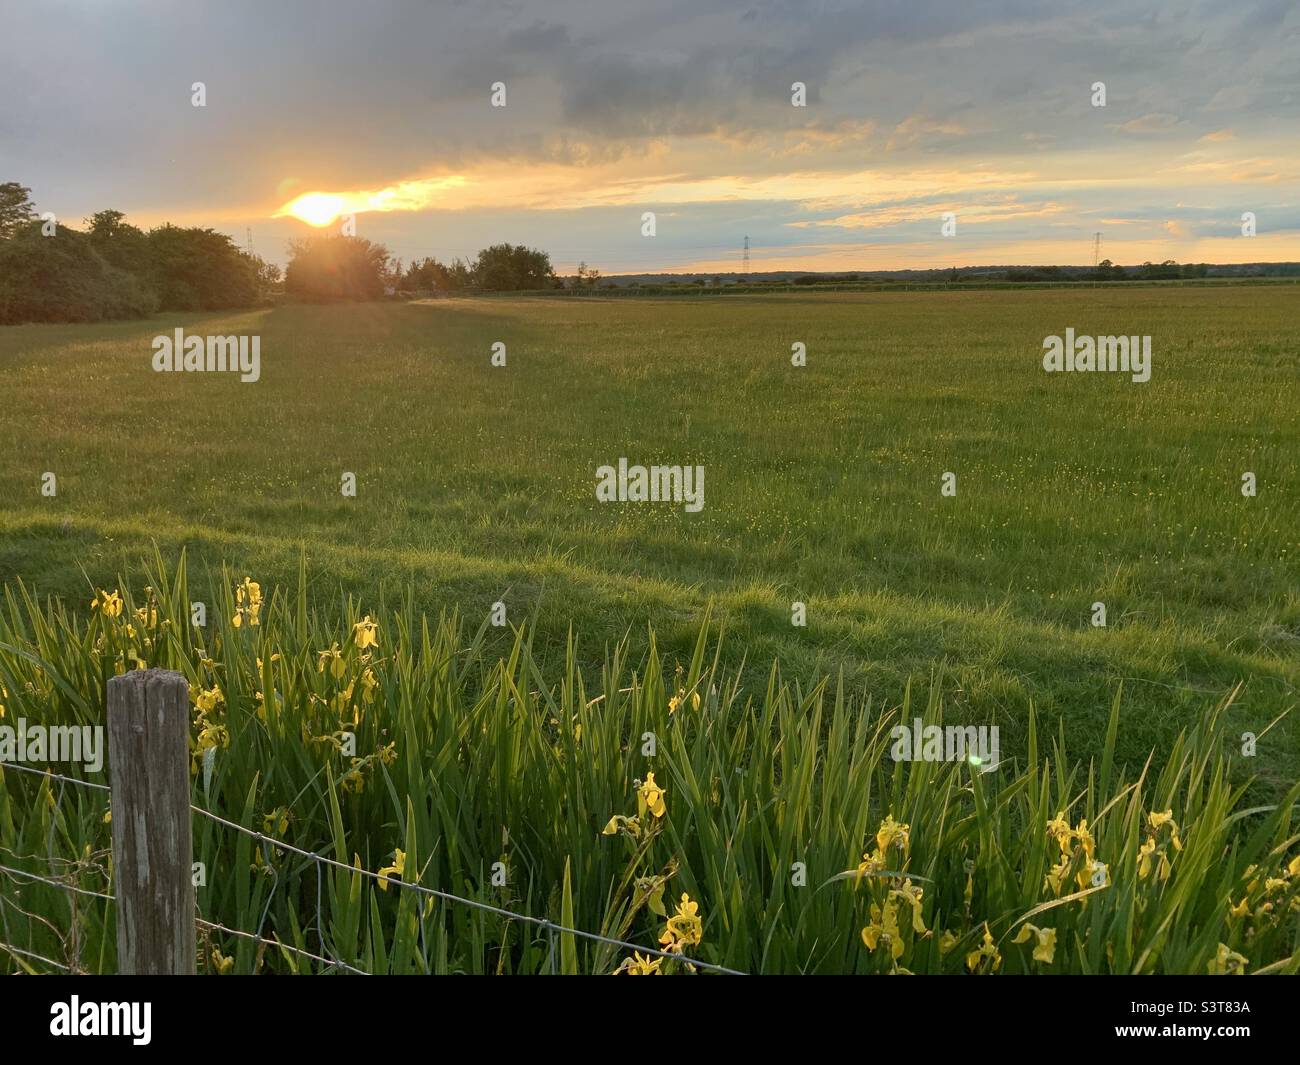 Hazy sunset over field with yellow iris in foreground Stock Photo